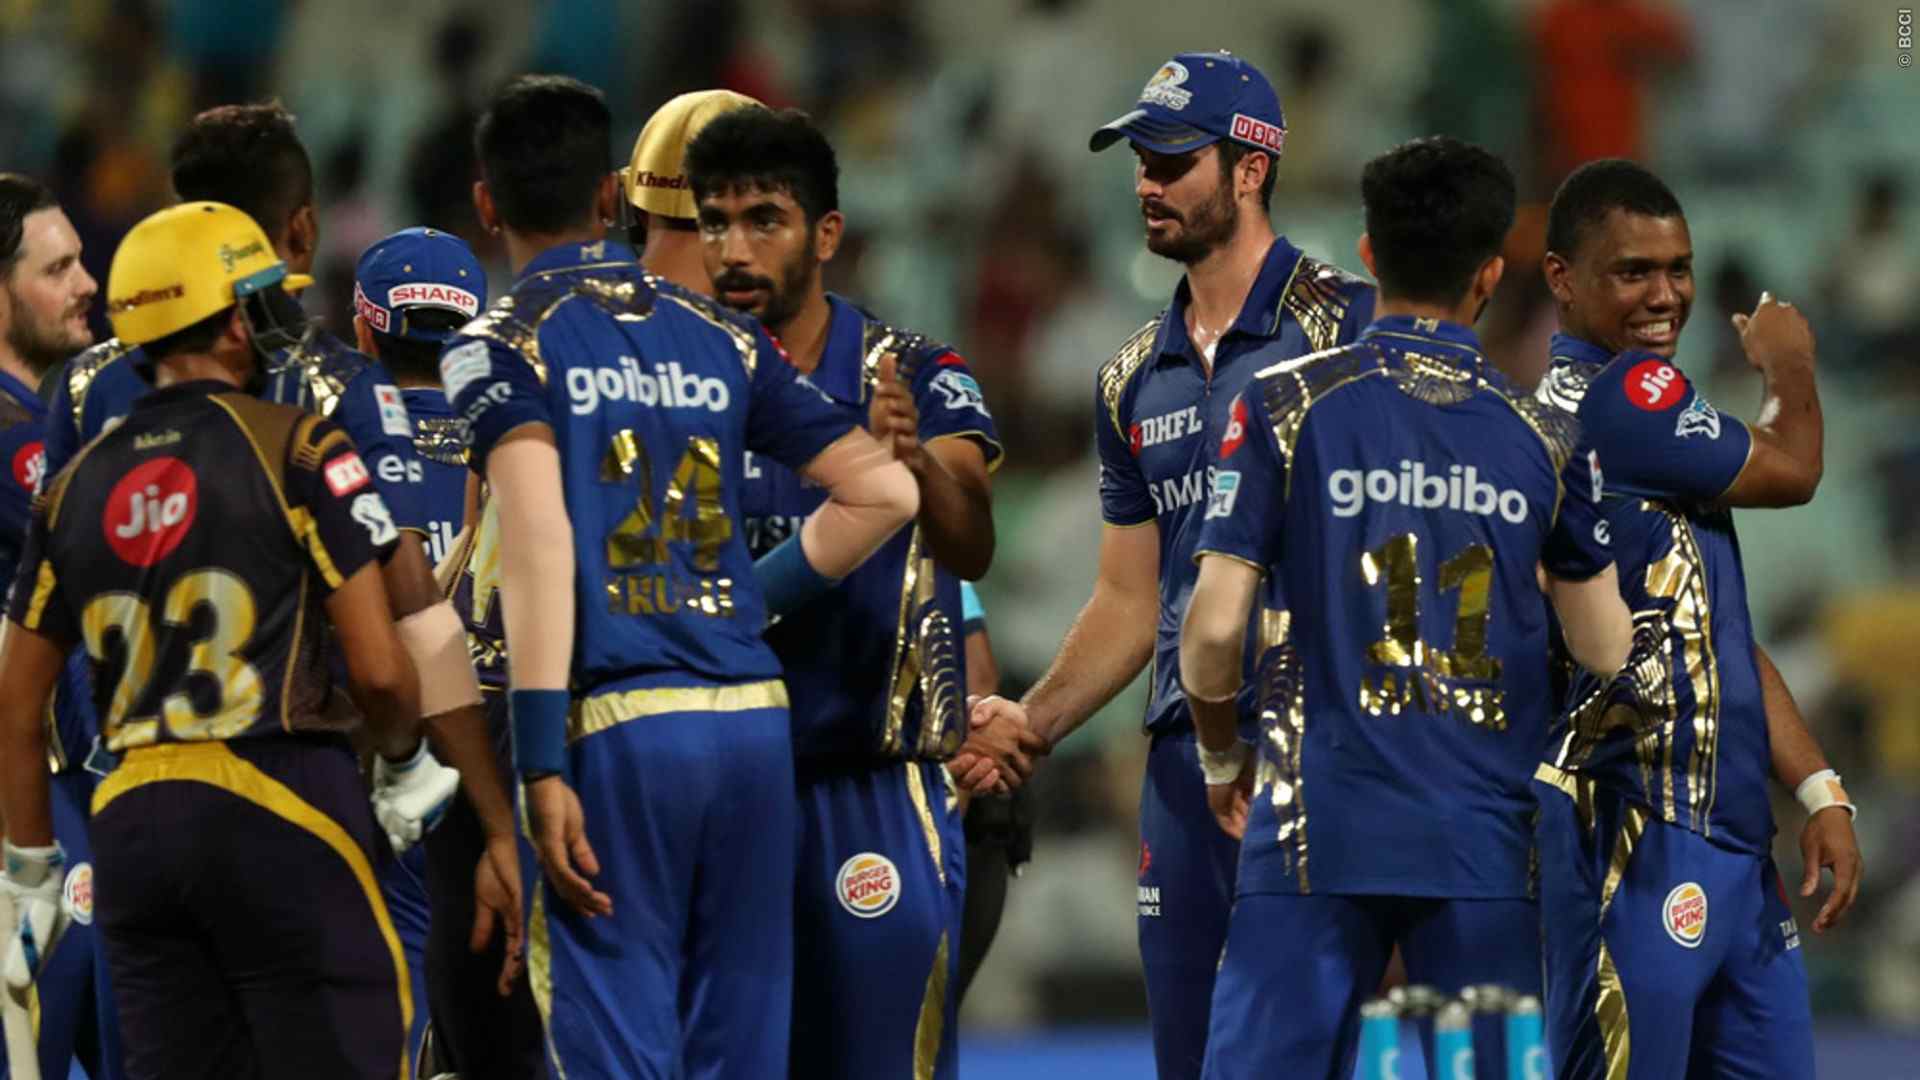 KKR and MI players in a file photo. (Image credit: Twitter)